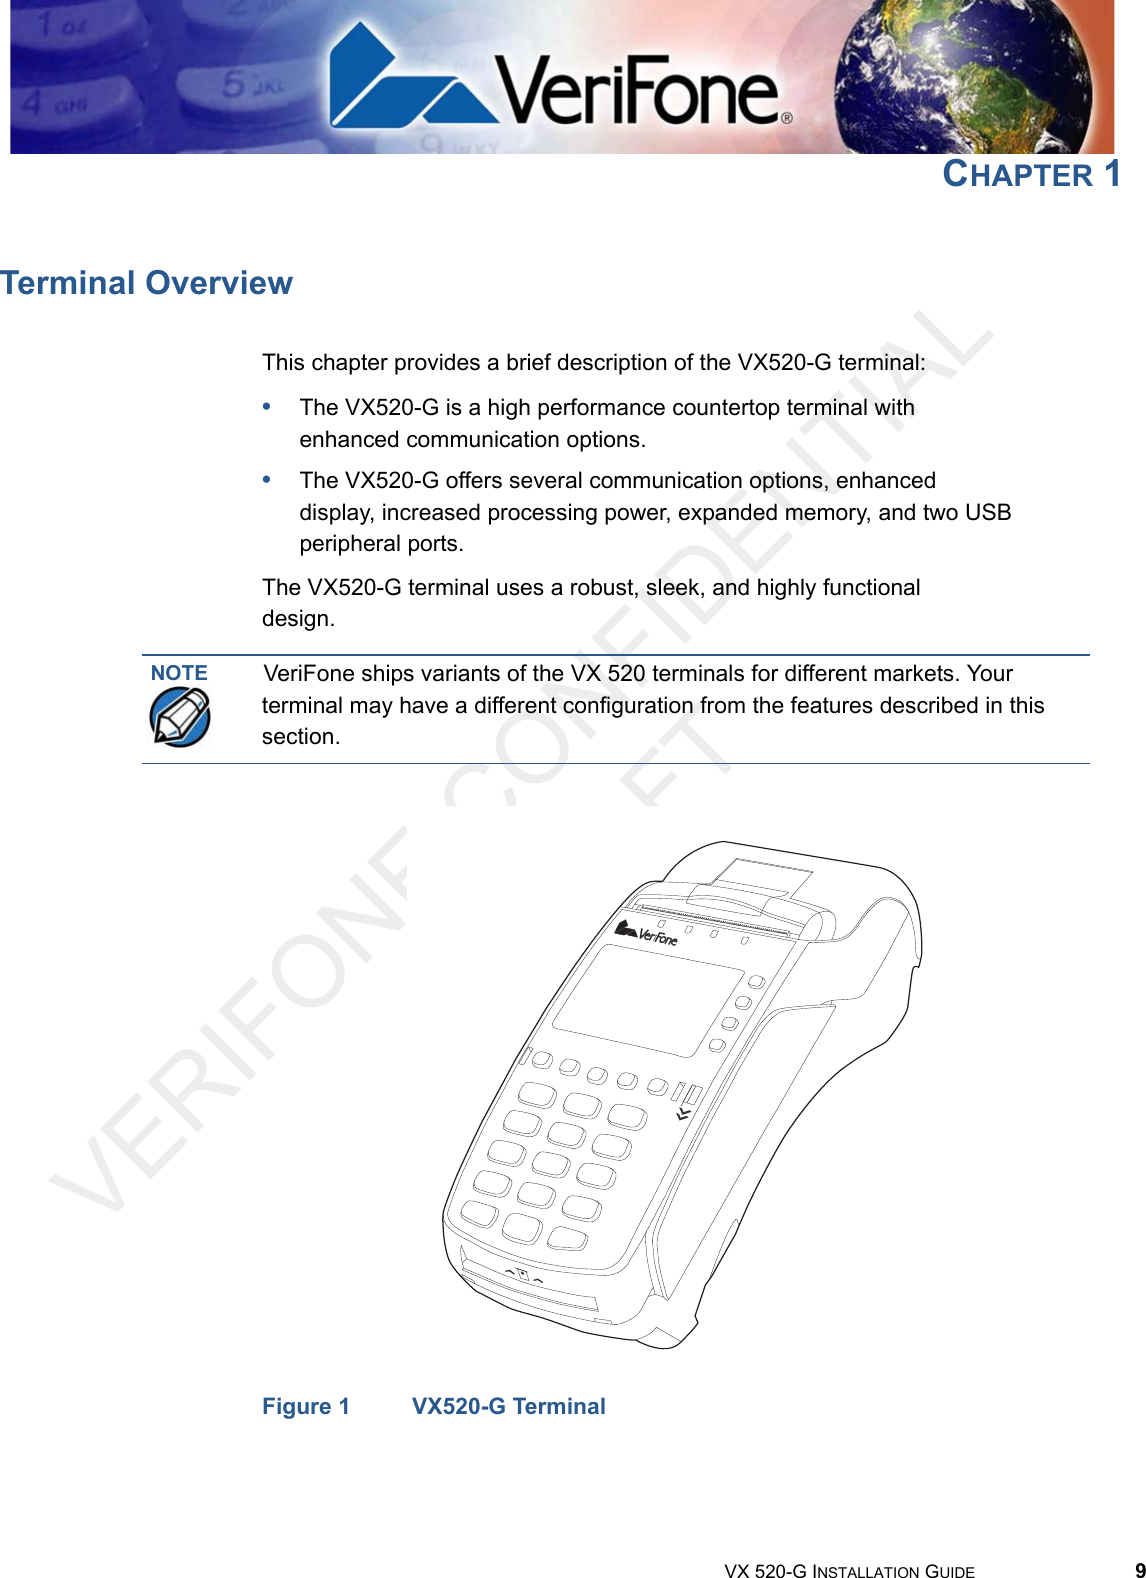 VERIFONE CONFIDENTIAL DRAFTVX 520-G INSTALLATION GUIDE 9CHAPTER 1Terminal OverviewThis chapter provides a brief description of the VX520-G terminal:•The VX520-G is a high performance countertop terminal with enhanced communication options.•The VX520-G offers several communication options, enhanced display, increased processing power, expanded memory, and two USB peripheral ports.The VX520-G terminal uses a robust, sleek, and highly functional design.Figure 1 VX520-G TerminalNOTE VeriFone ships variants of the VX 520 terminals for different markets. Your terminal may have a different configuration from the features described in this section.